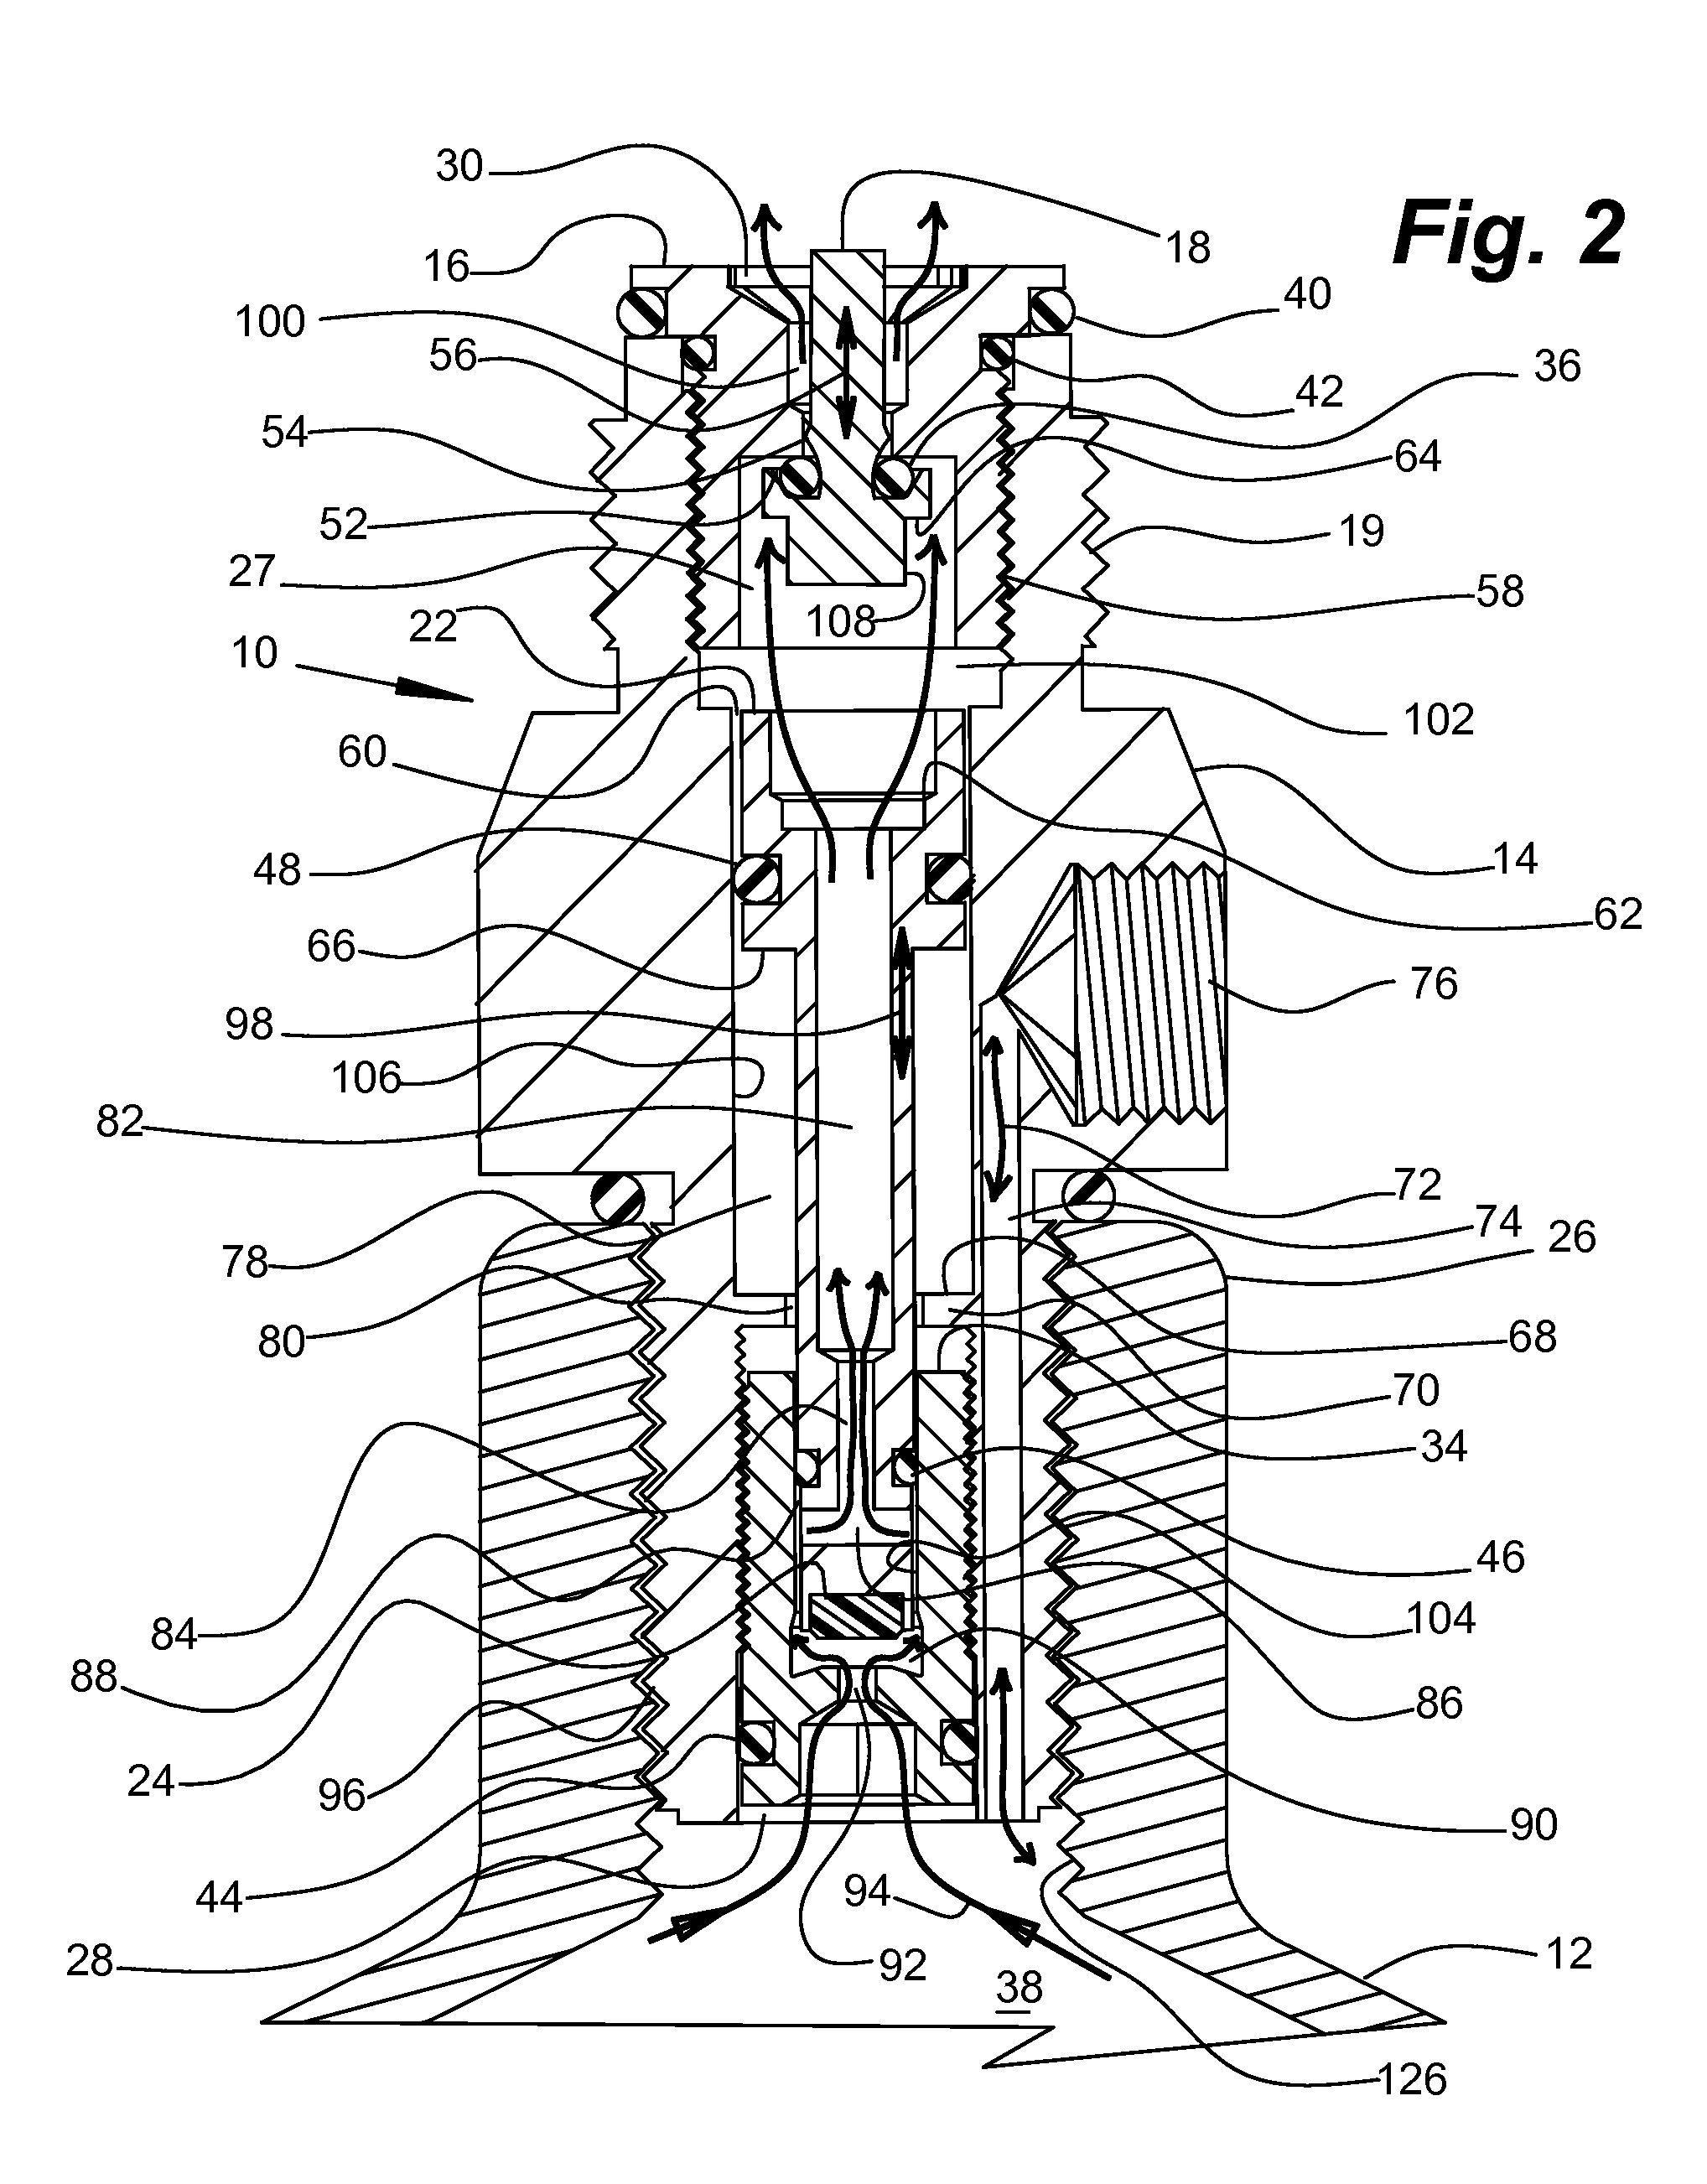 Compressed air regulator apparatus situated in canister and method for regulating compressed air thereof